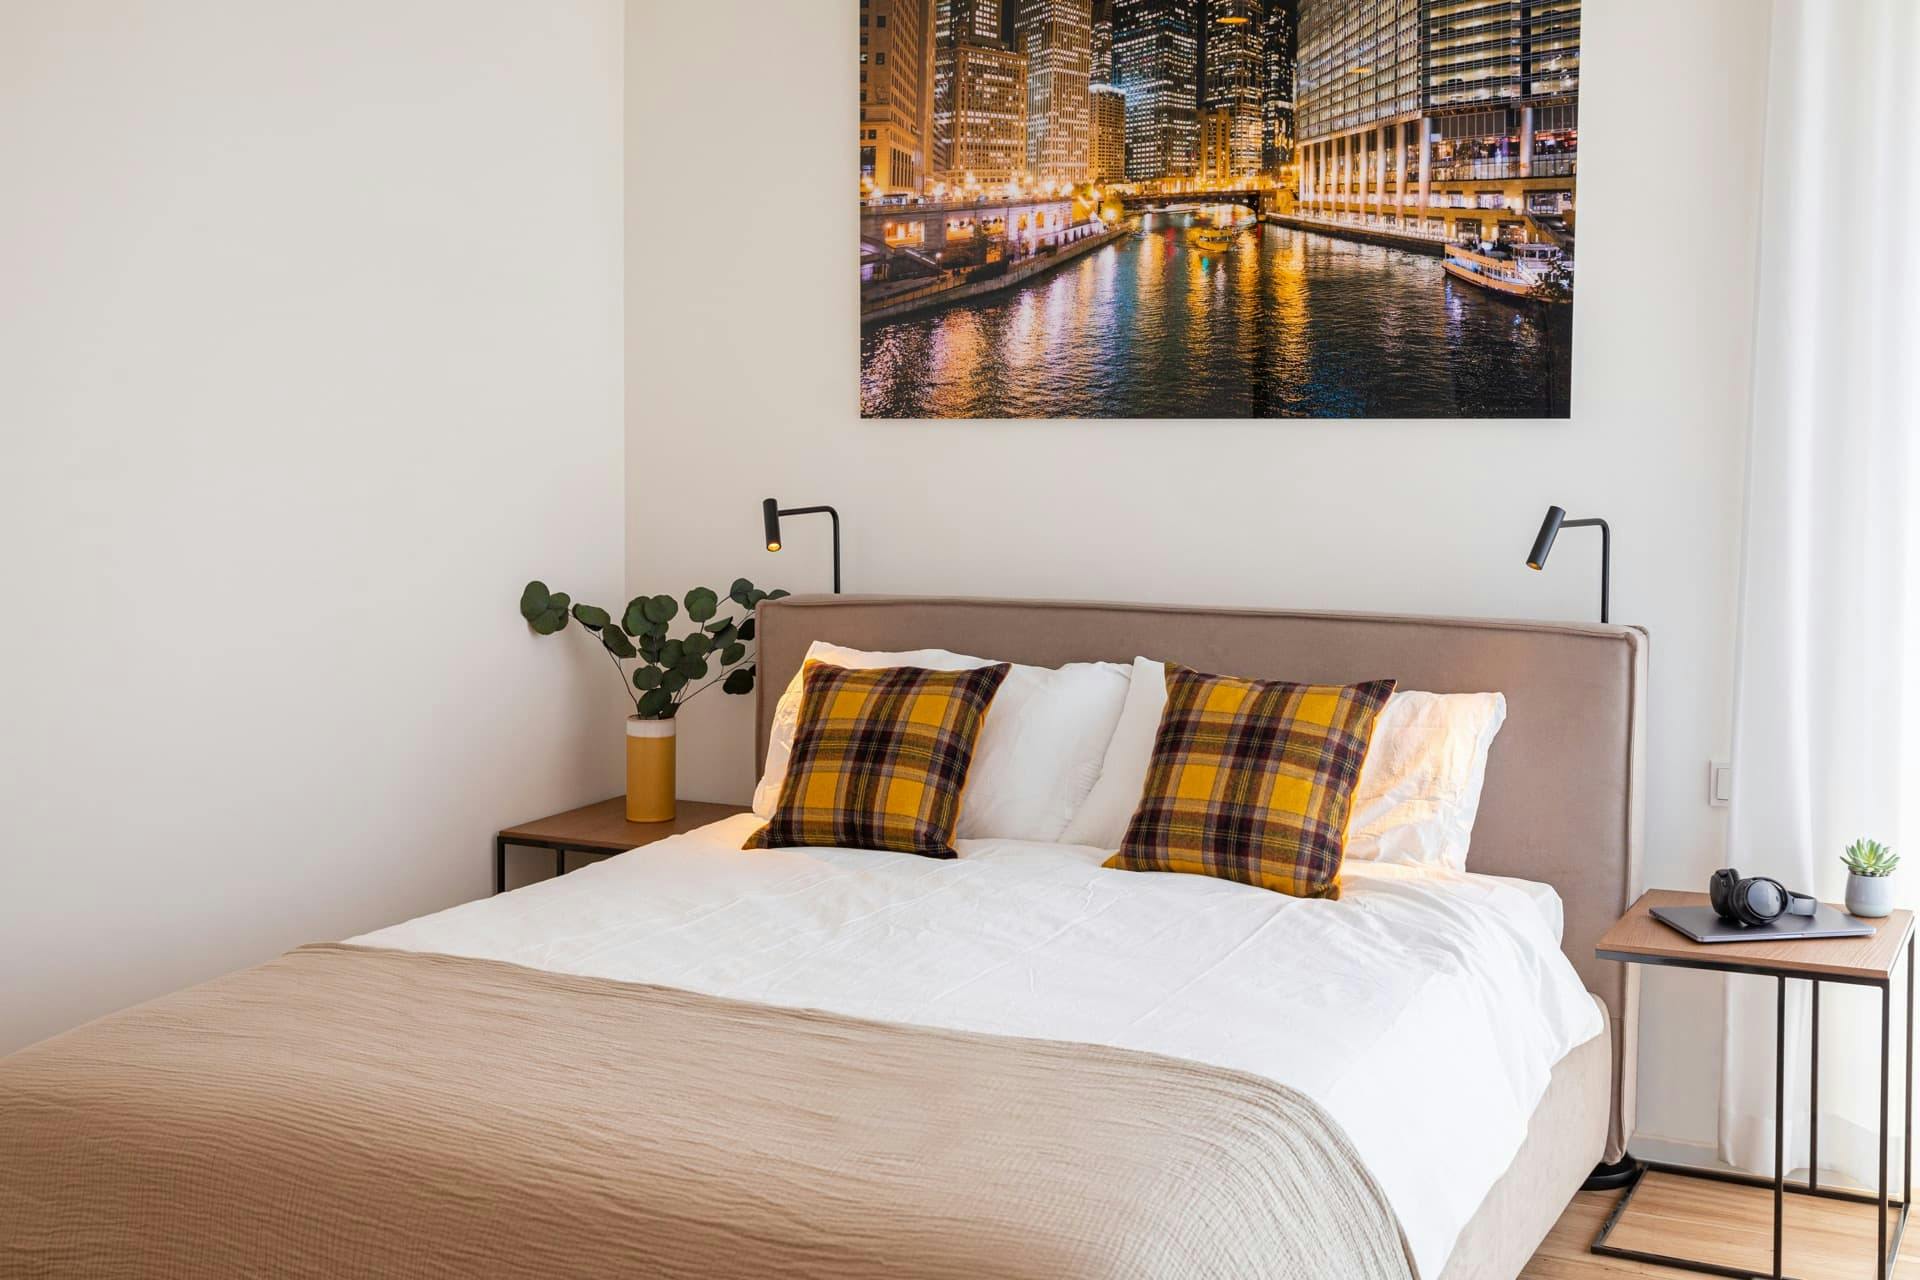 A bed with bedside table, the table has a vase with green foliage and the bed has white bedding and mustard tartan cushion. There is a night view of a city on a large photograph above the bed.